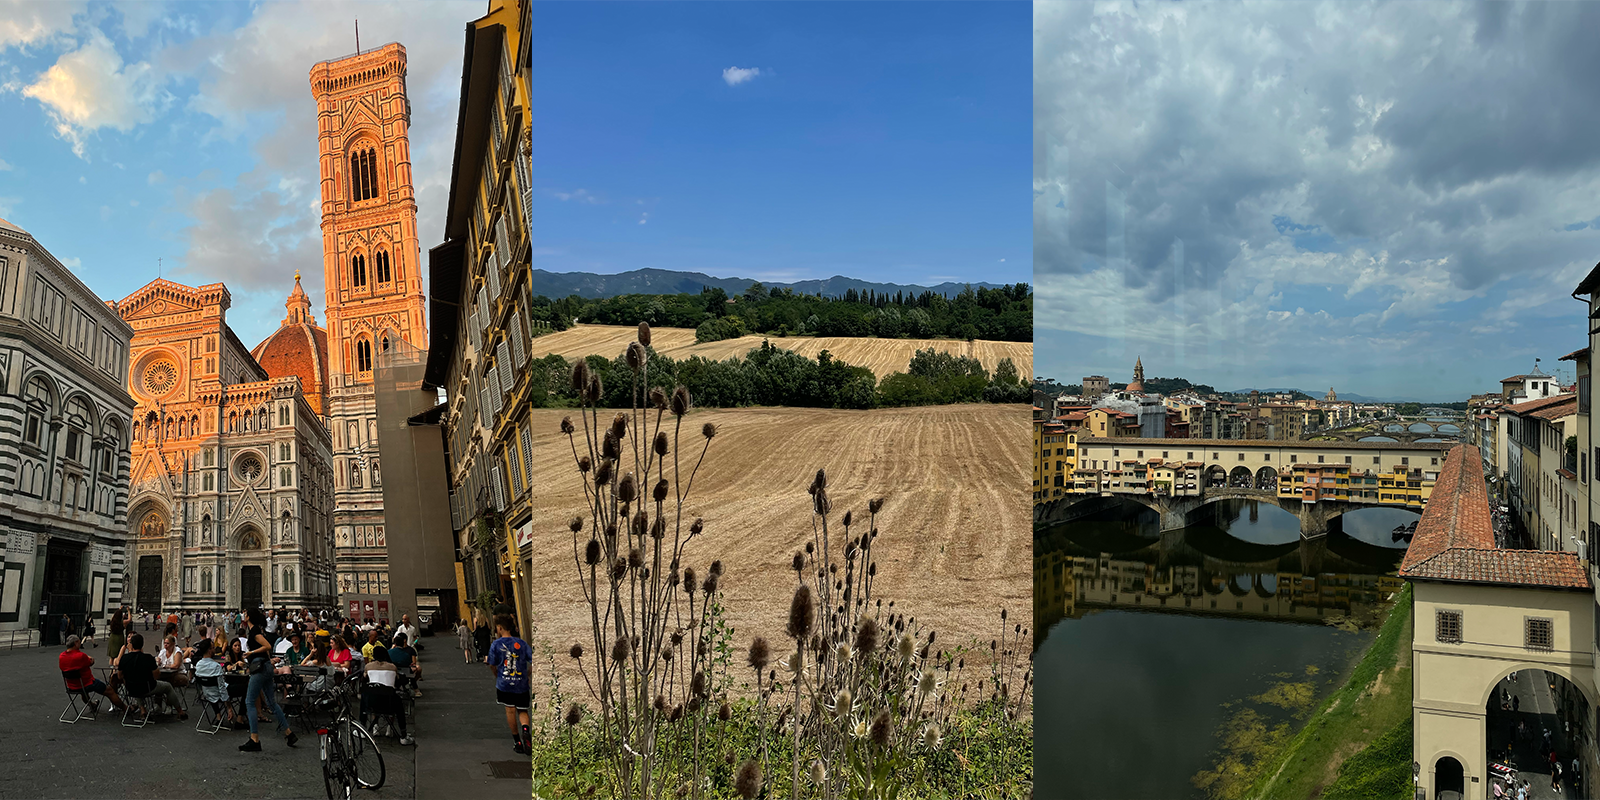 Image of a cathedral, image of the Italian countryside and image of a bridge in a village